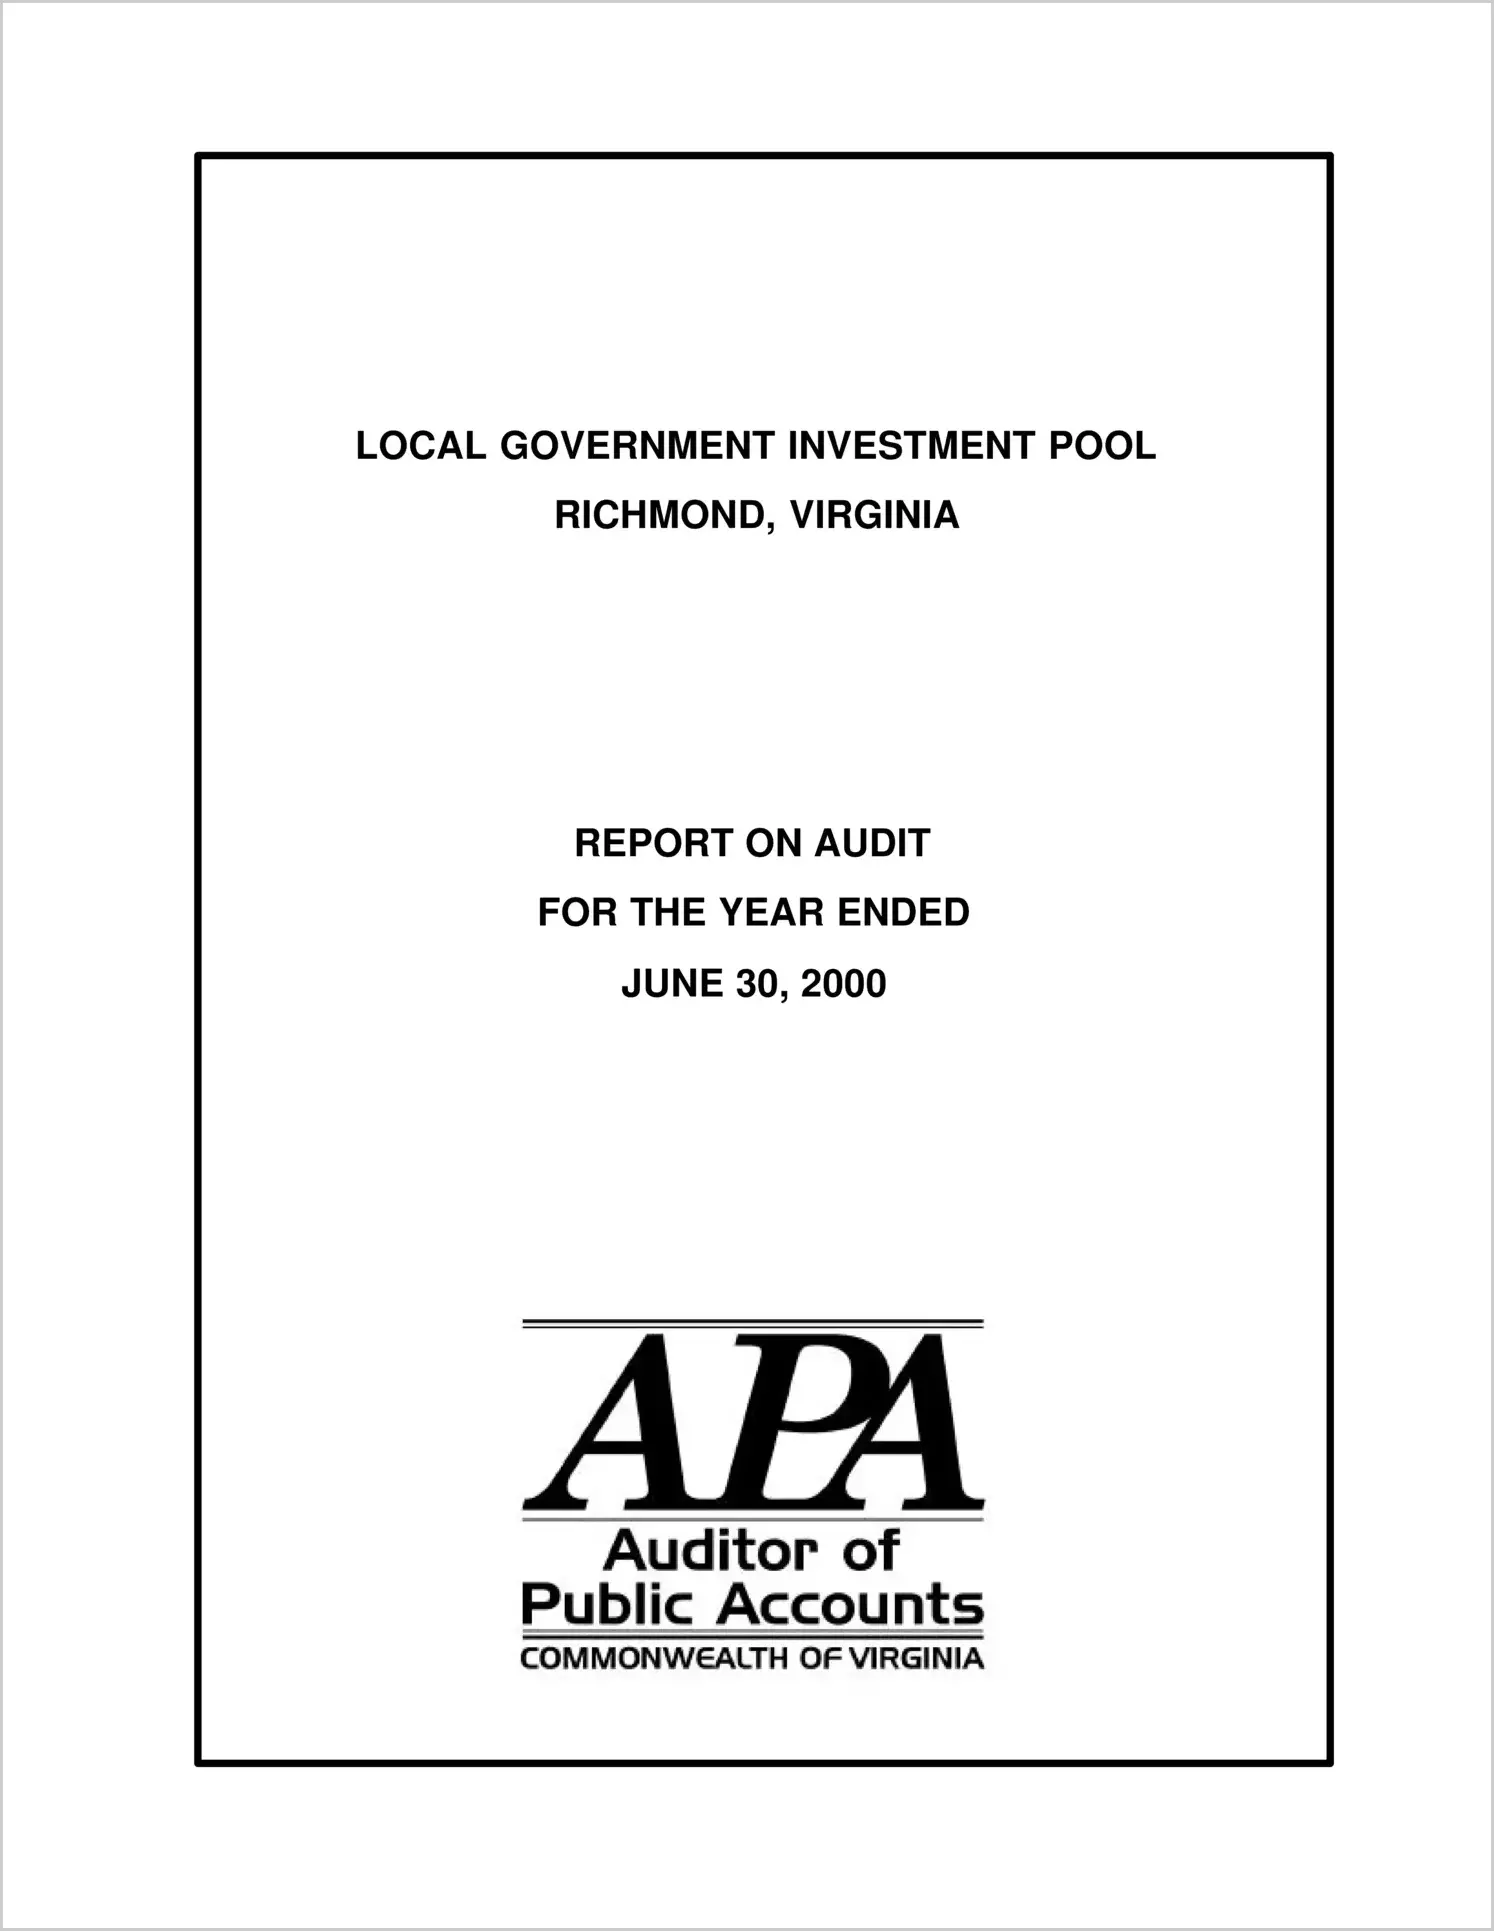 Local Government Investment Pool for the year ended June 30, 2000